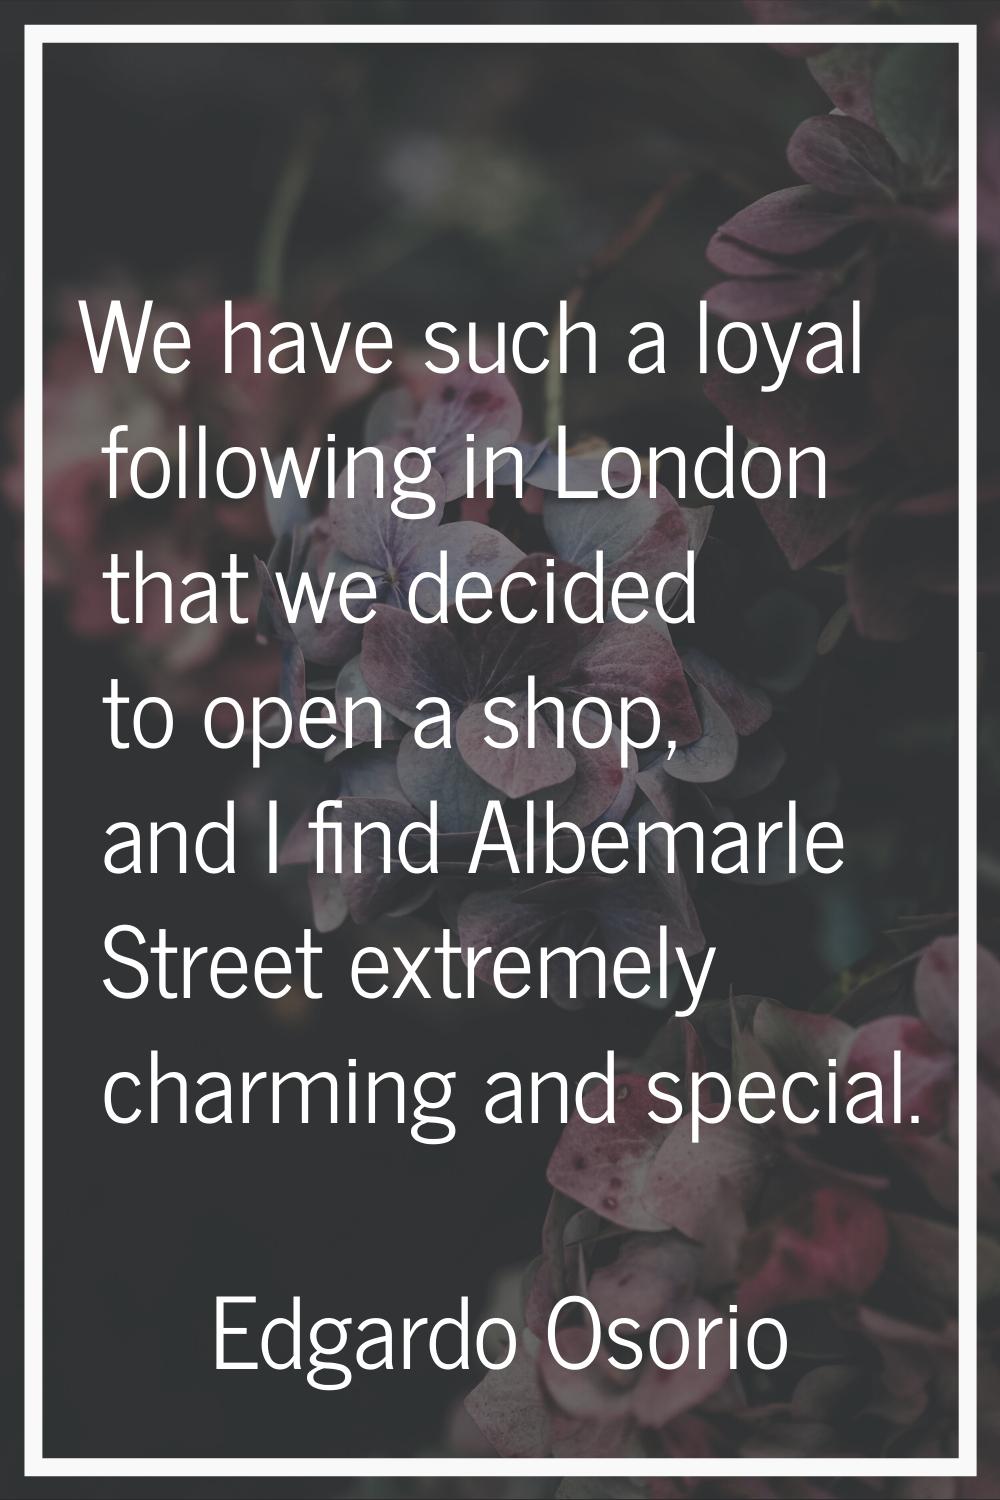 We have such a loyal following in London that we decided to open a shop, and I find Albemarle Stree